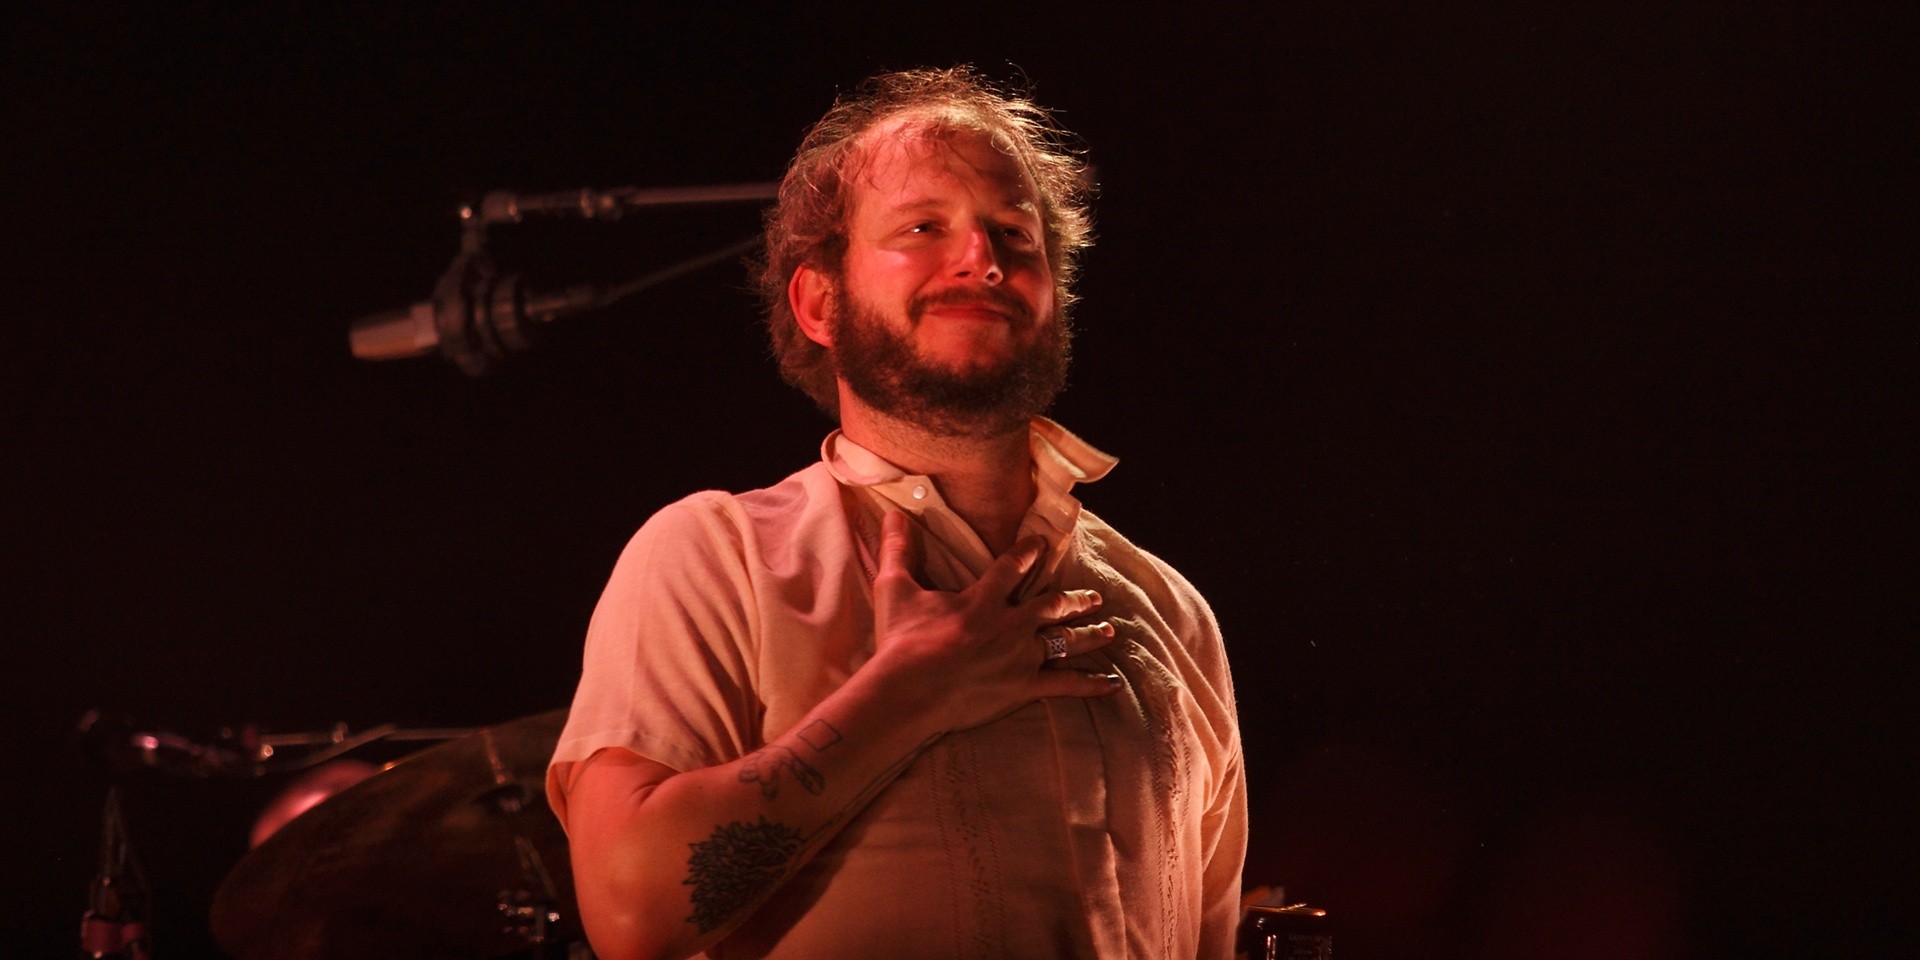 GIG REPORT: Bon Iver stuns with triumphant live debut in Singapore